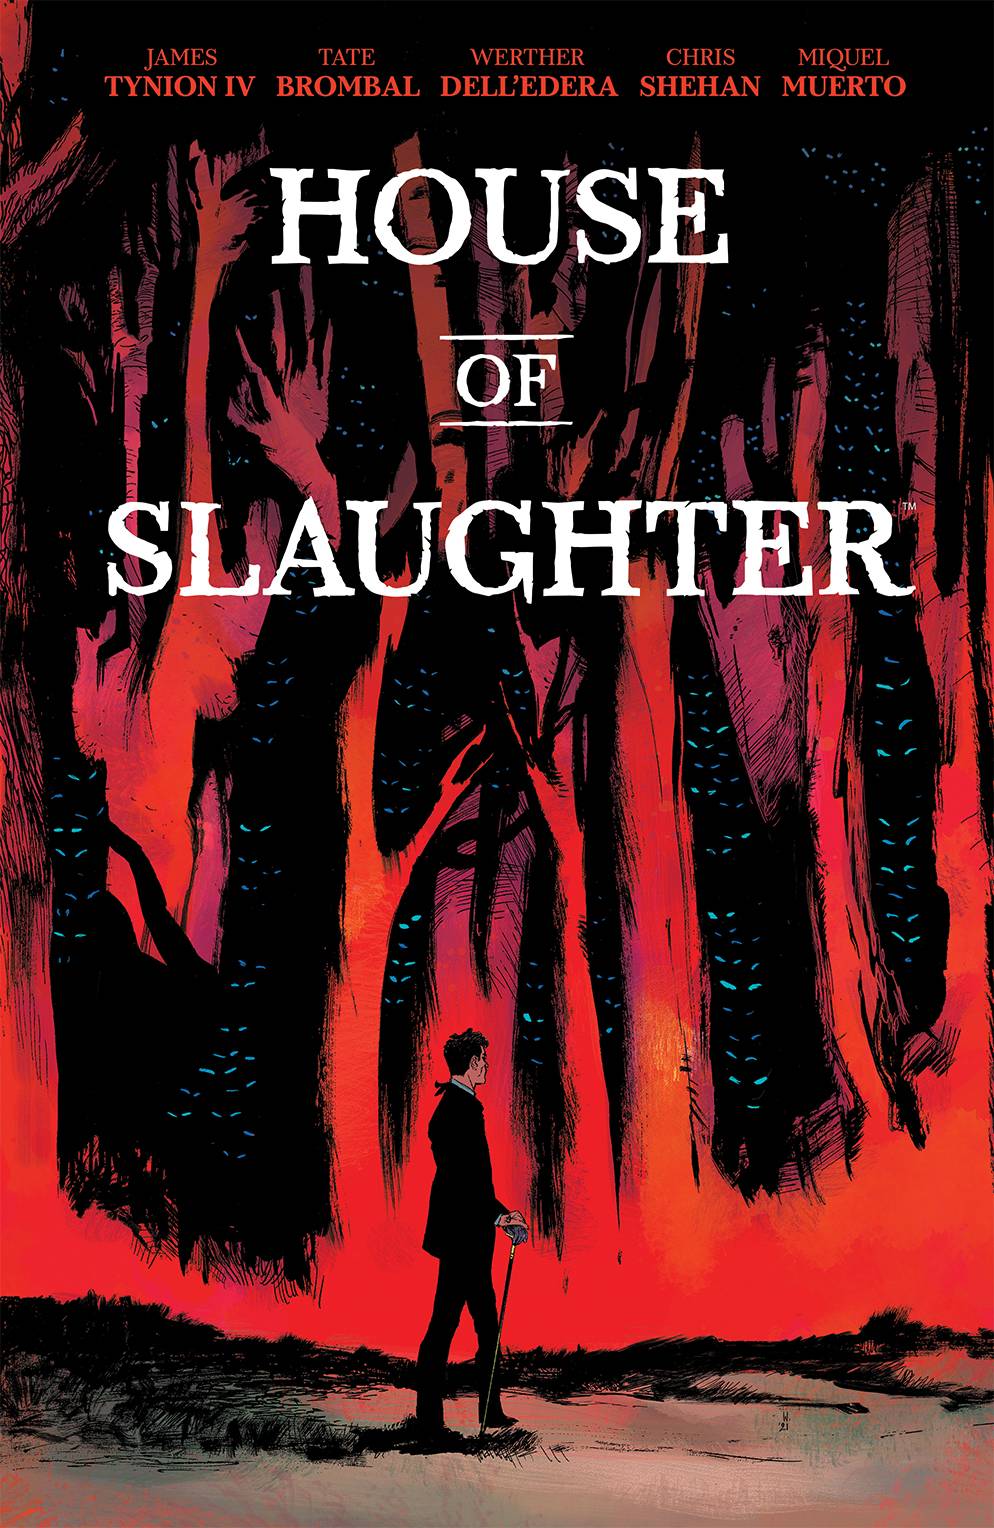 House Of Slaughter vol 1 s/c